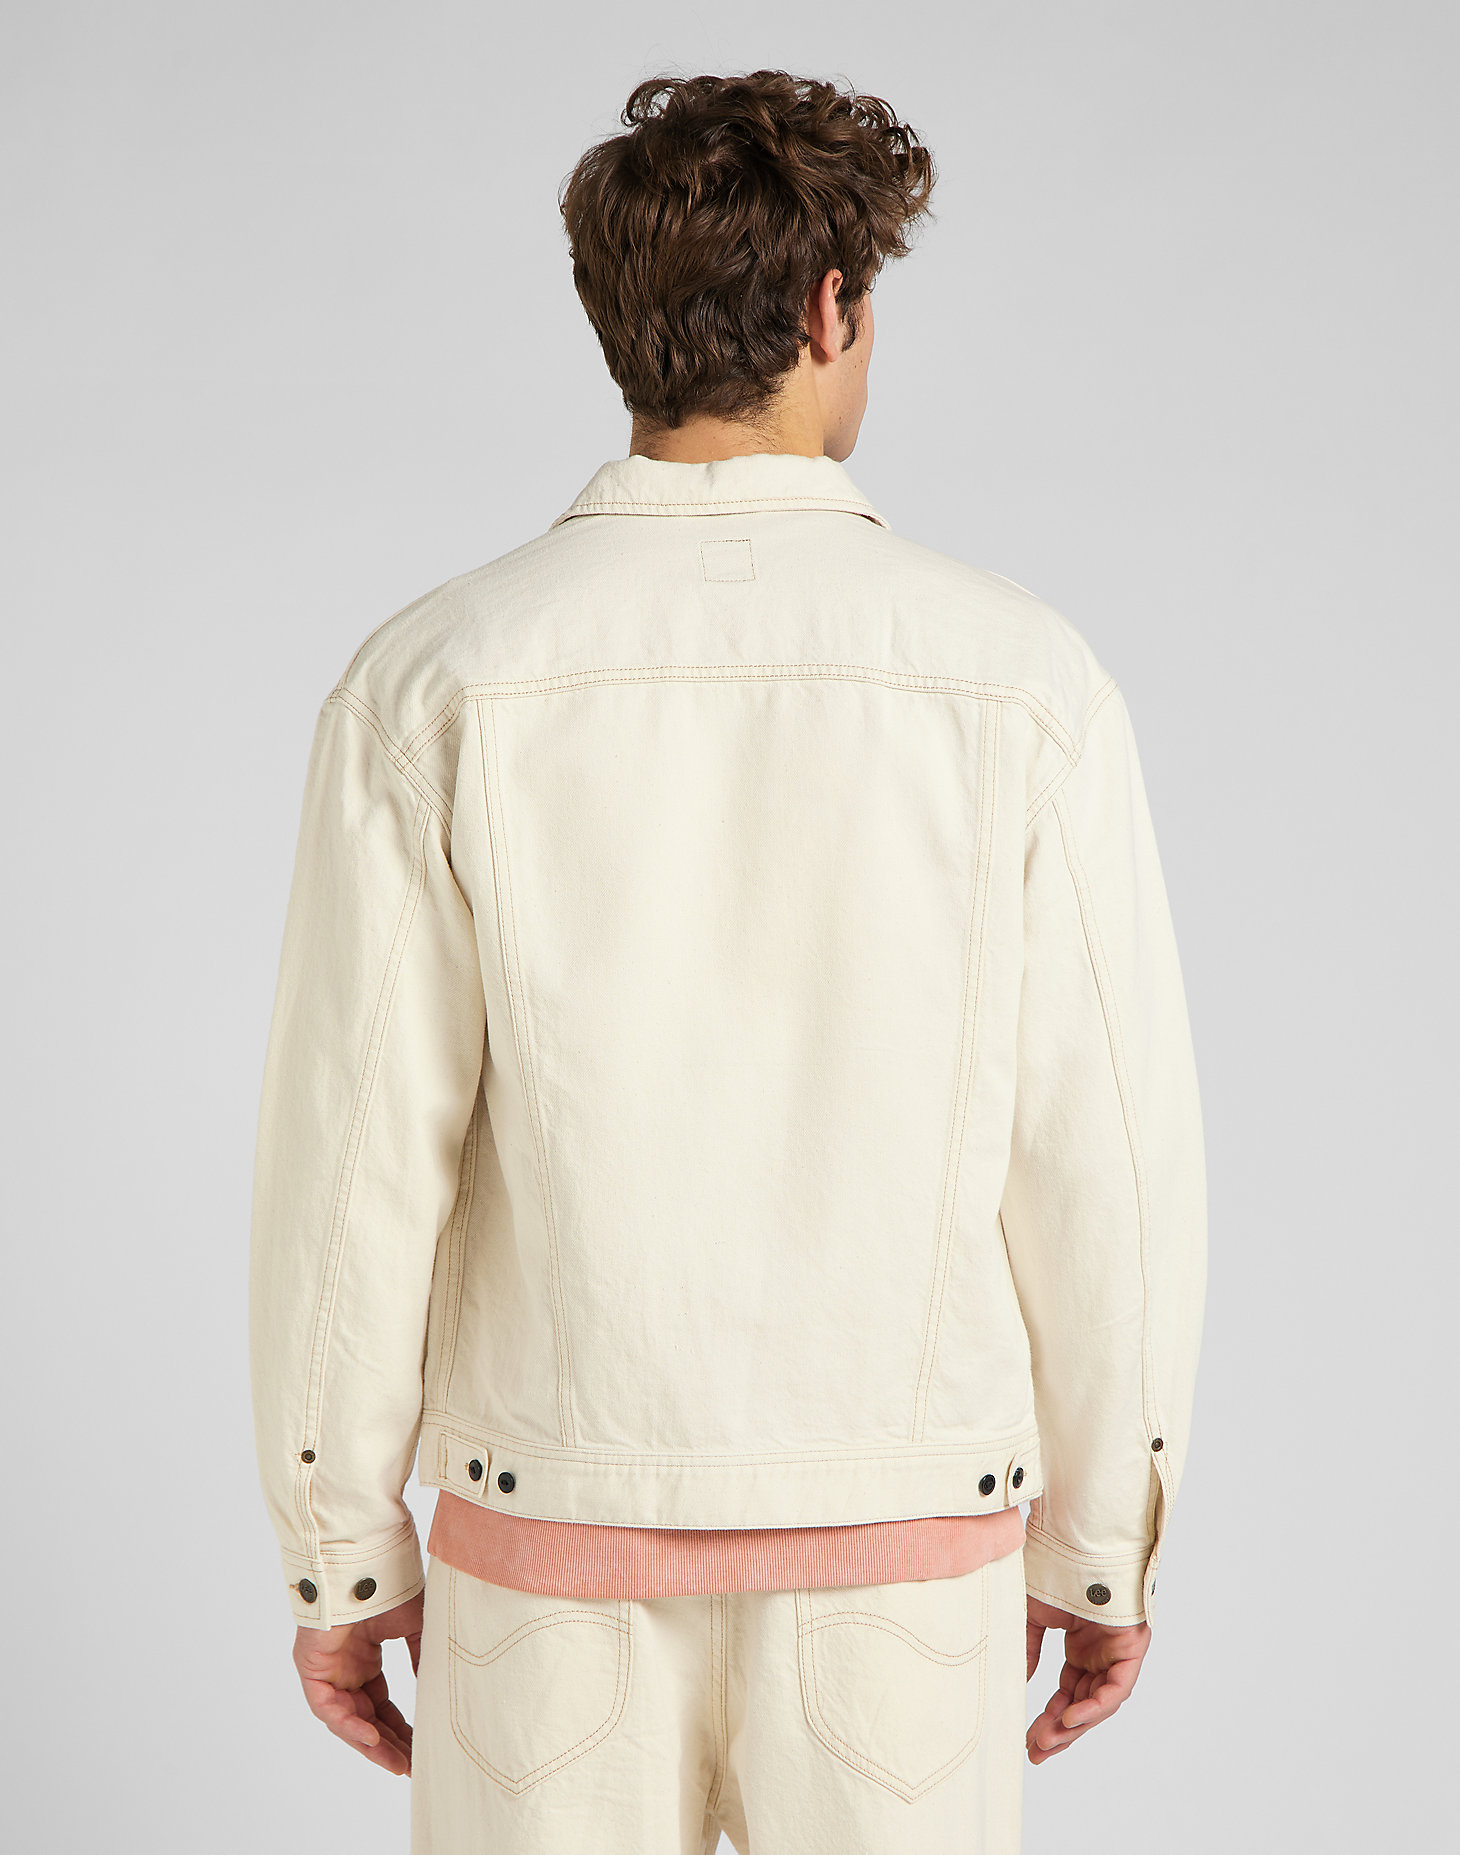 Relaxed Rider Jacket in Ecru alternative view 4